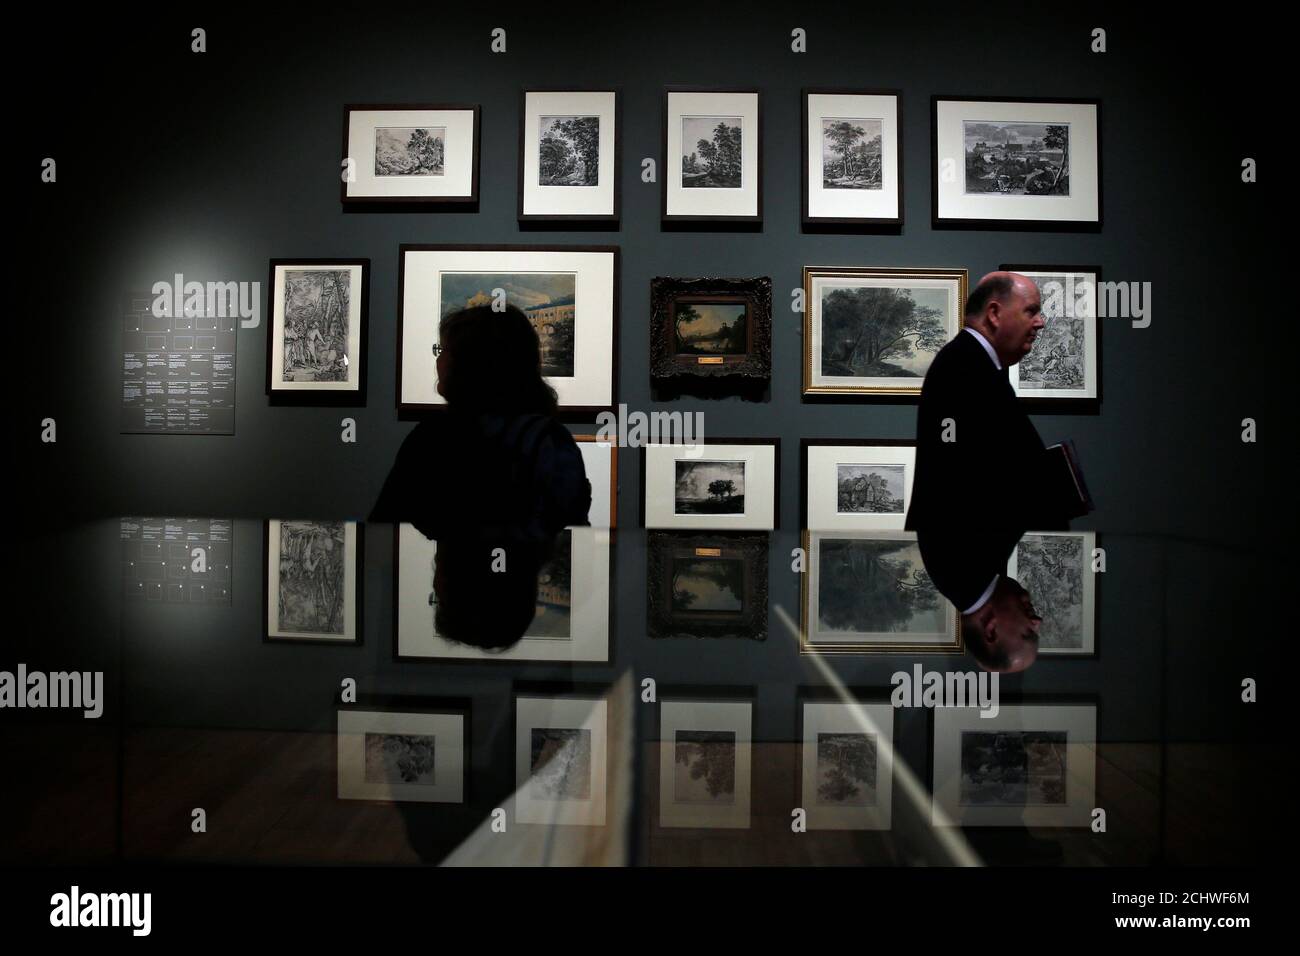 Visitors are reflected as they walk past prints of various artists during the press view of the 'Constable The Making of a Master' exhibition at the V&A museum in London September 17, 2014. REUTERS/Stefan Wermuth (BRITAIN - Tags: SOCIETY) Stock Photo